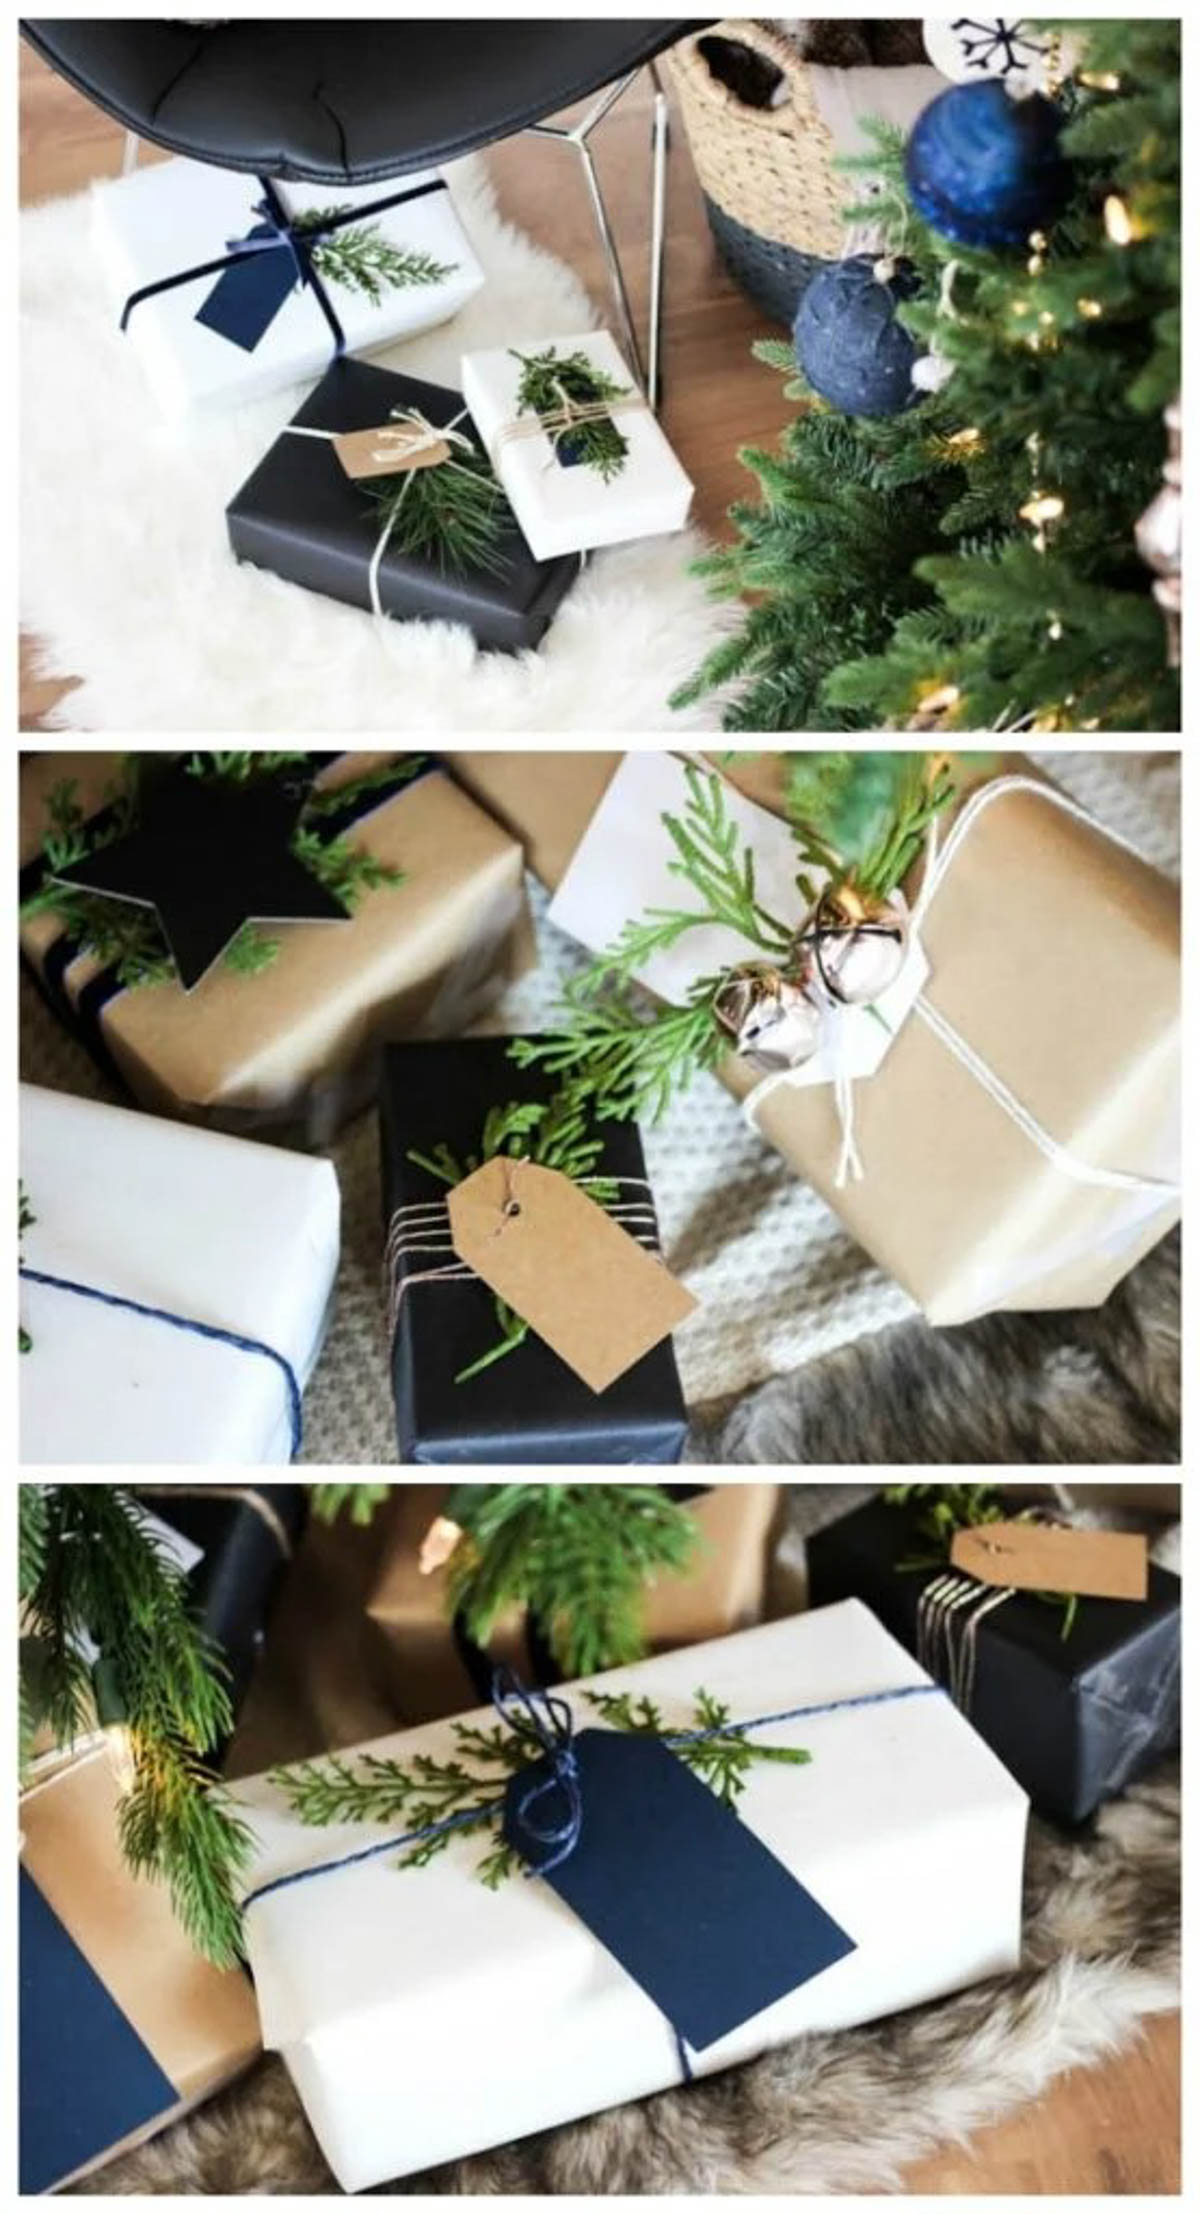 Image collage of DIY gift wrapped presents.